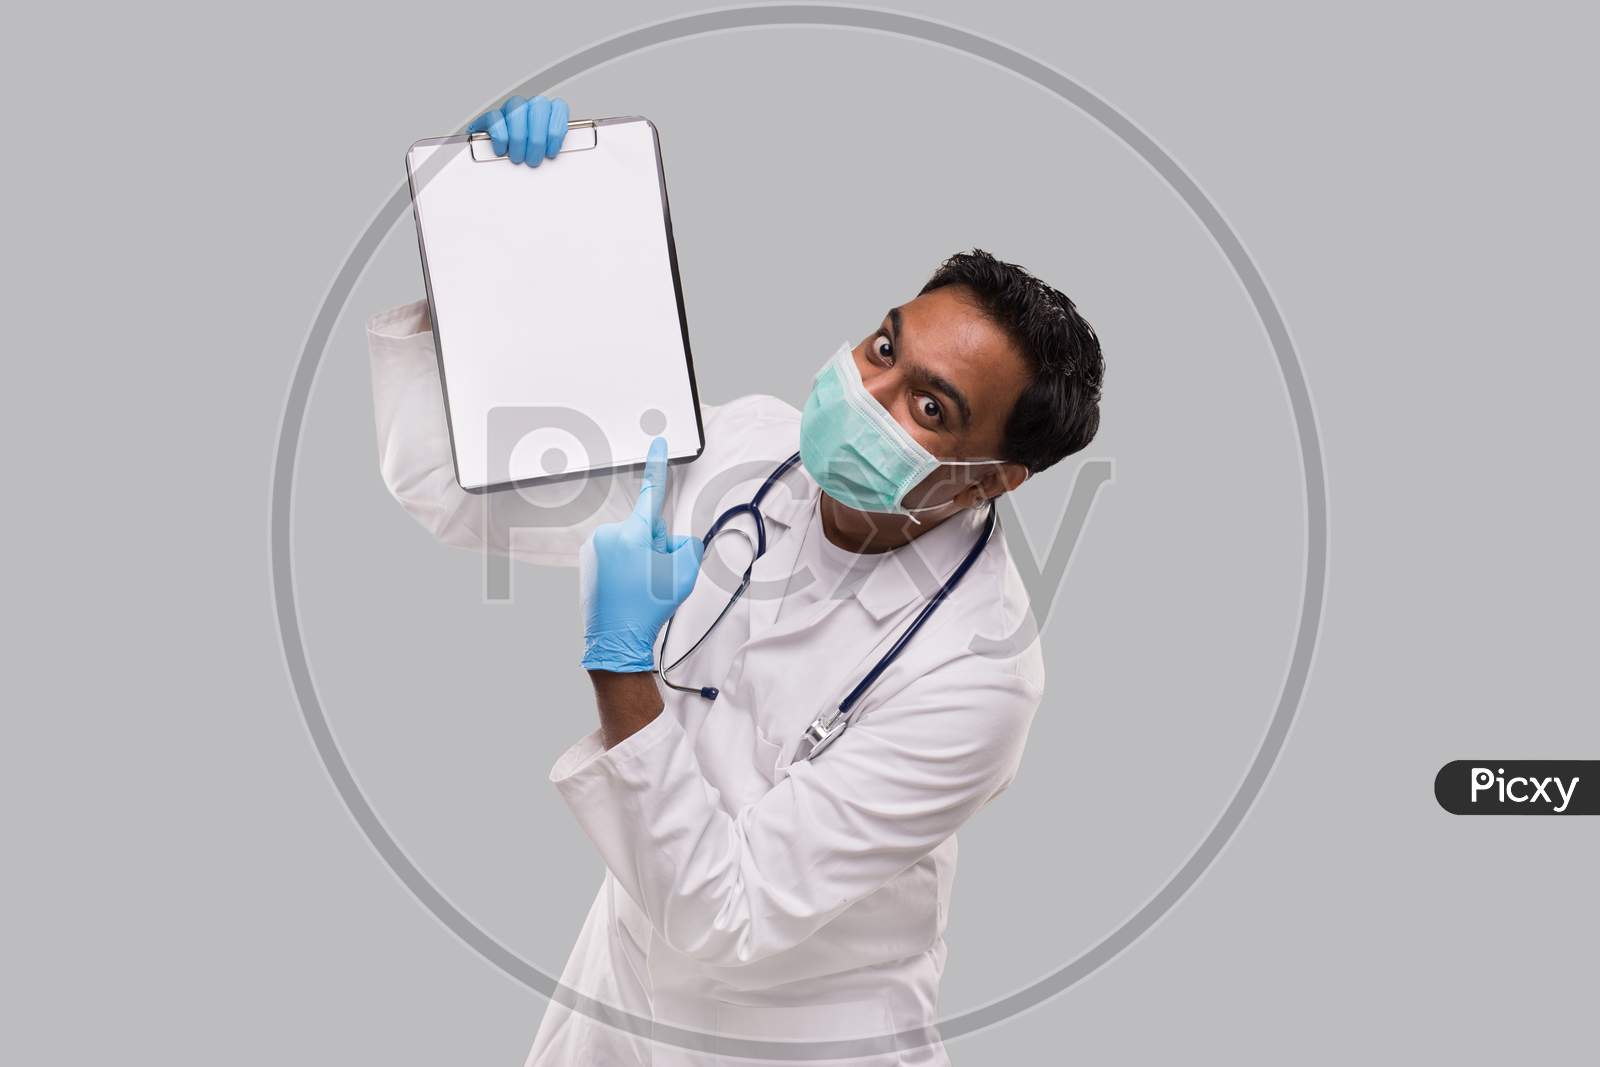 Doctor Pointing At Clipboard Wearing Medical Mask And Gloves Isolated. Indian Man Doctor Blank Clipboard In Hands